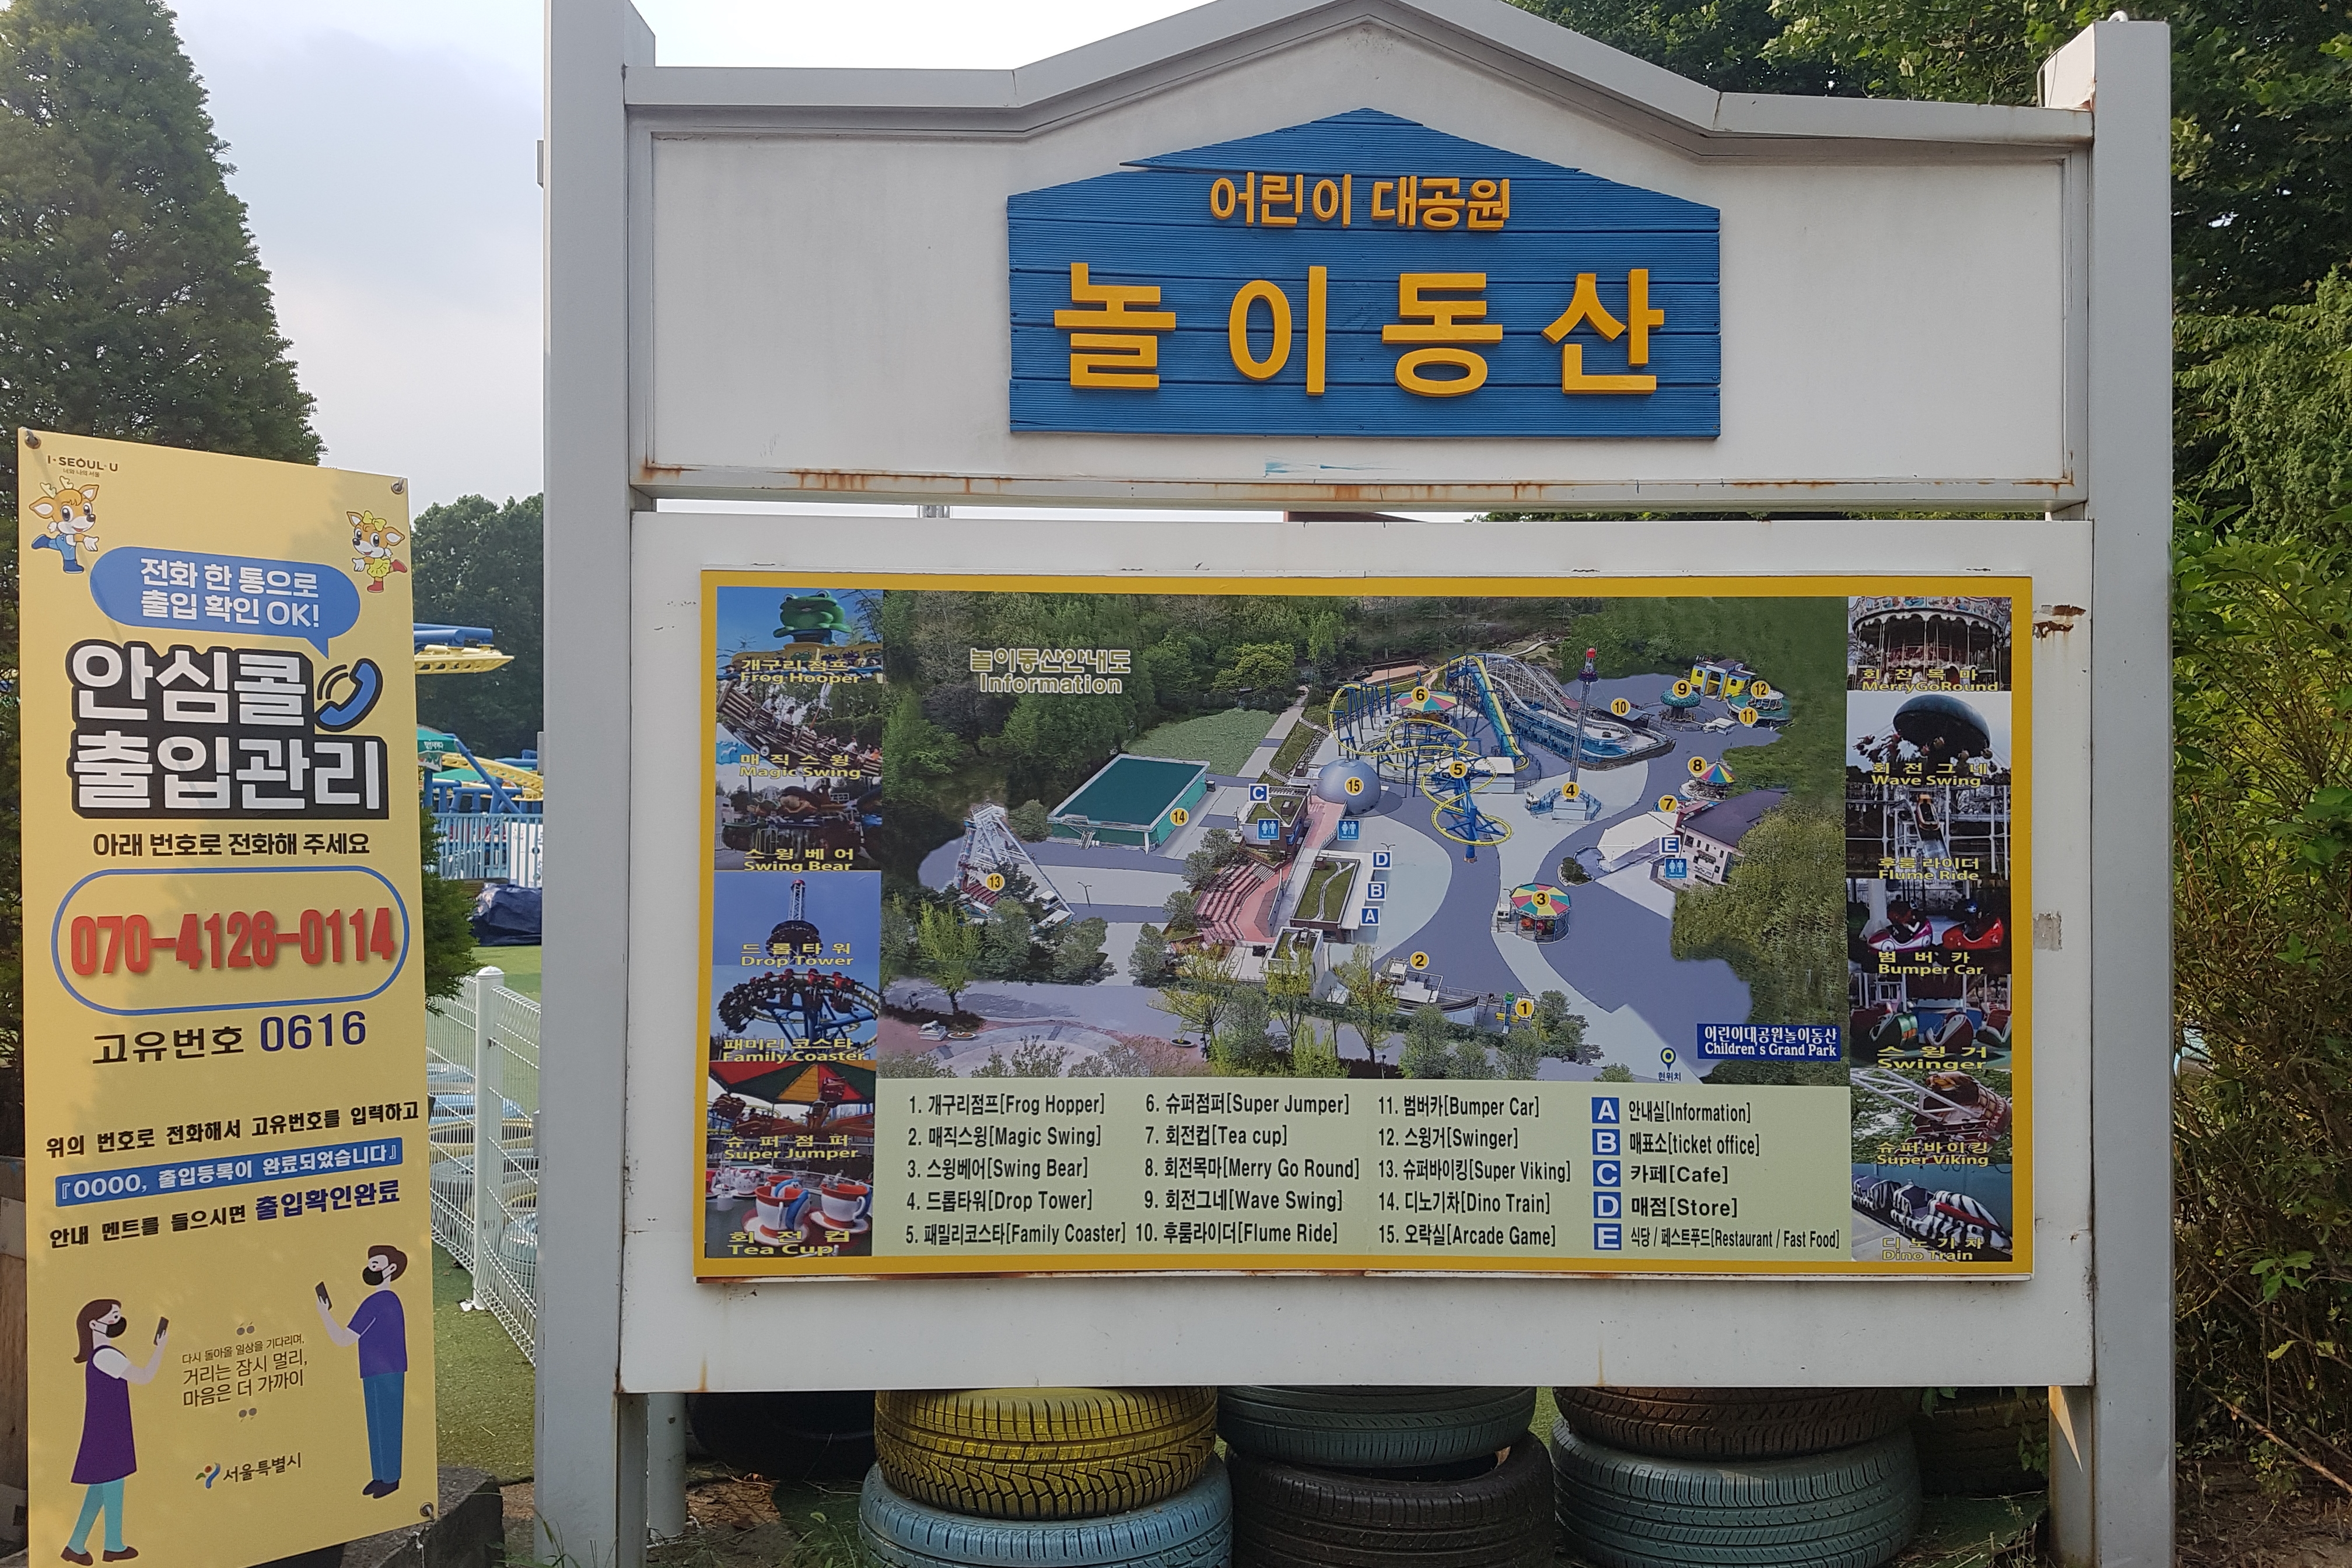 Guide map and information desk0 : Guide map of Seoul Children's Grand Park 3